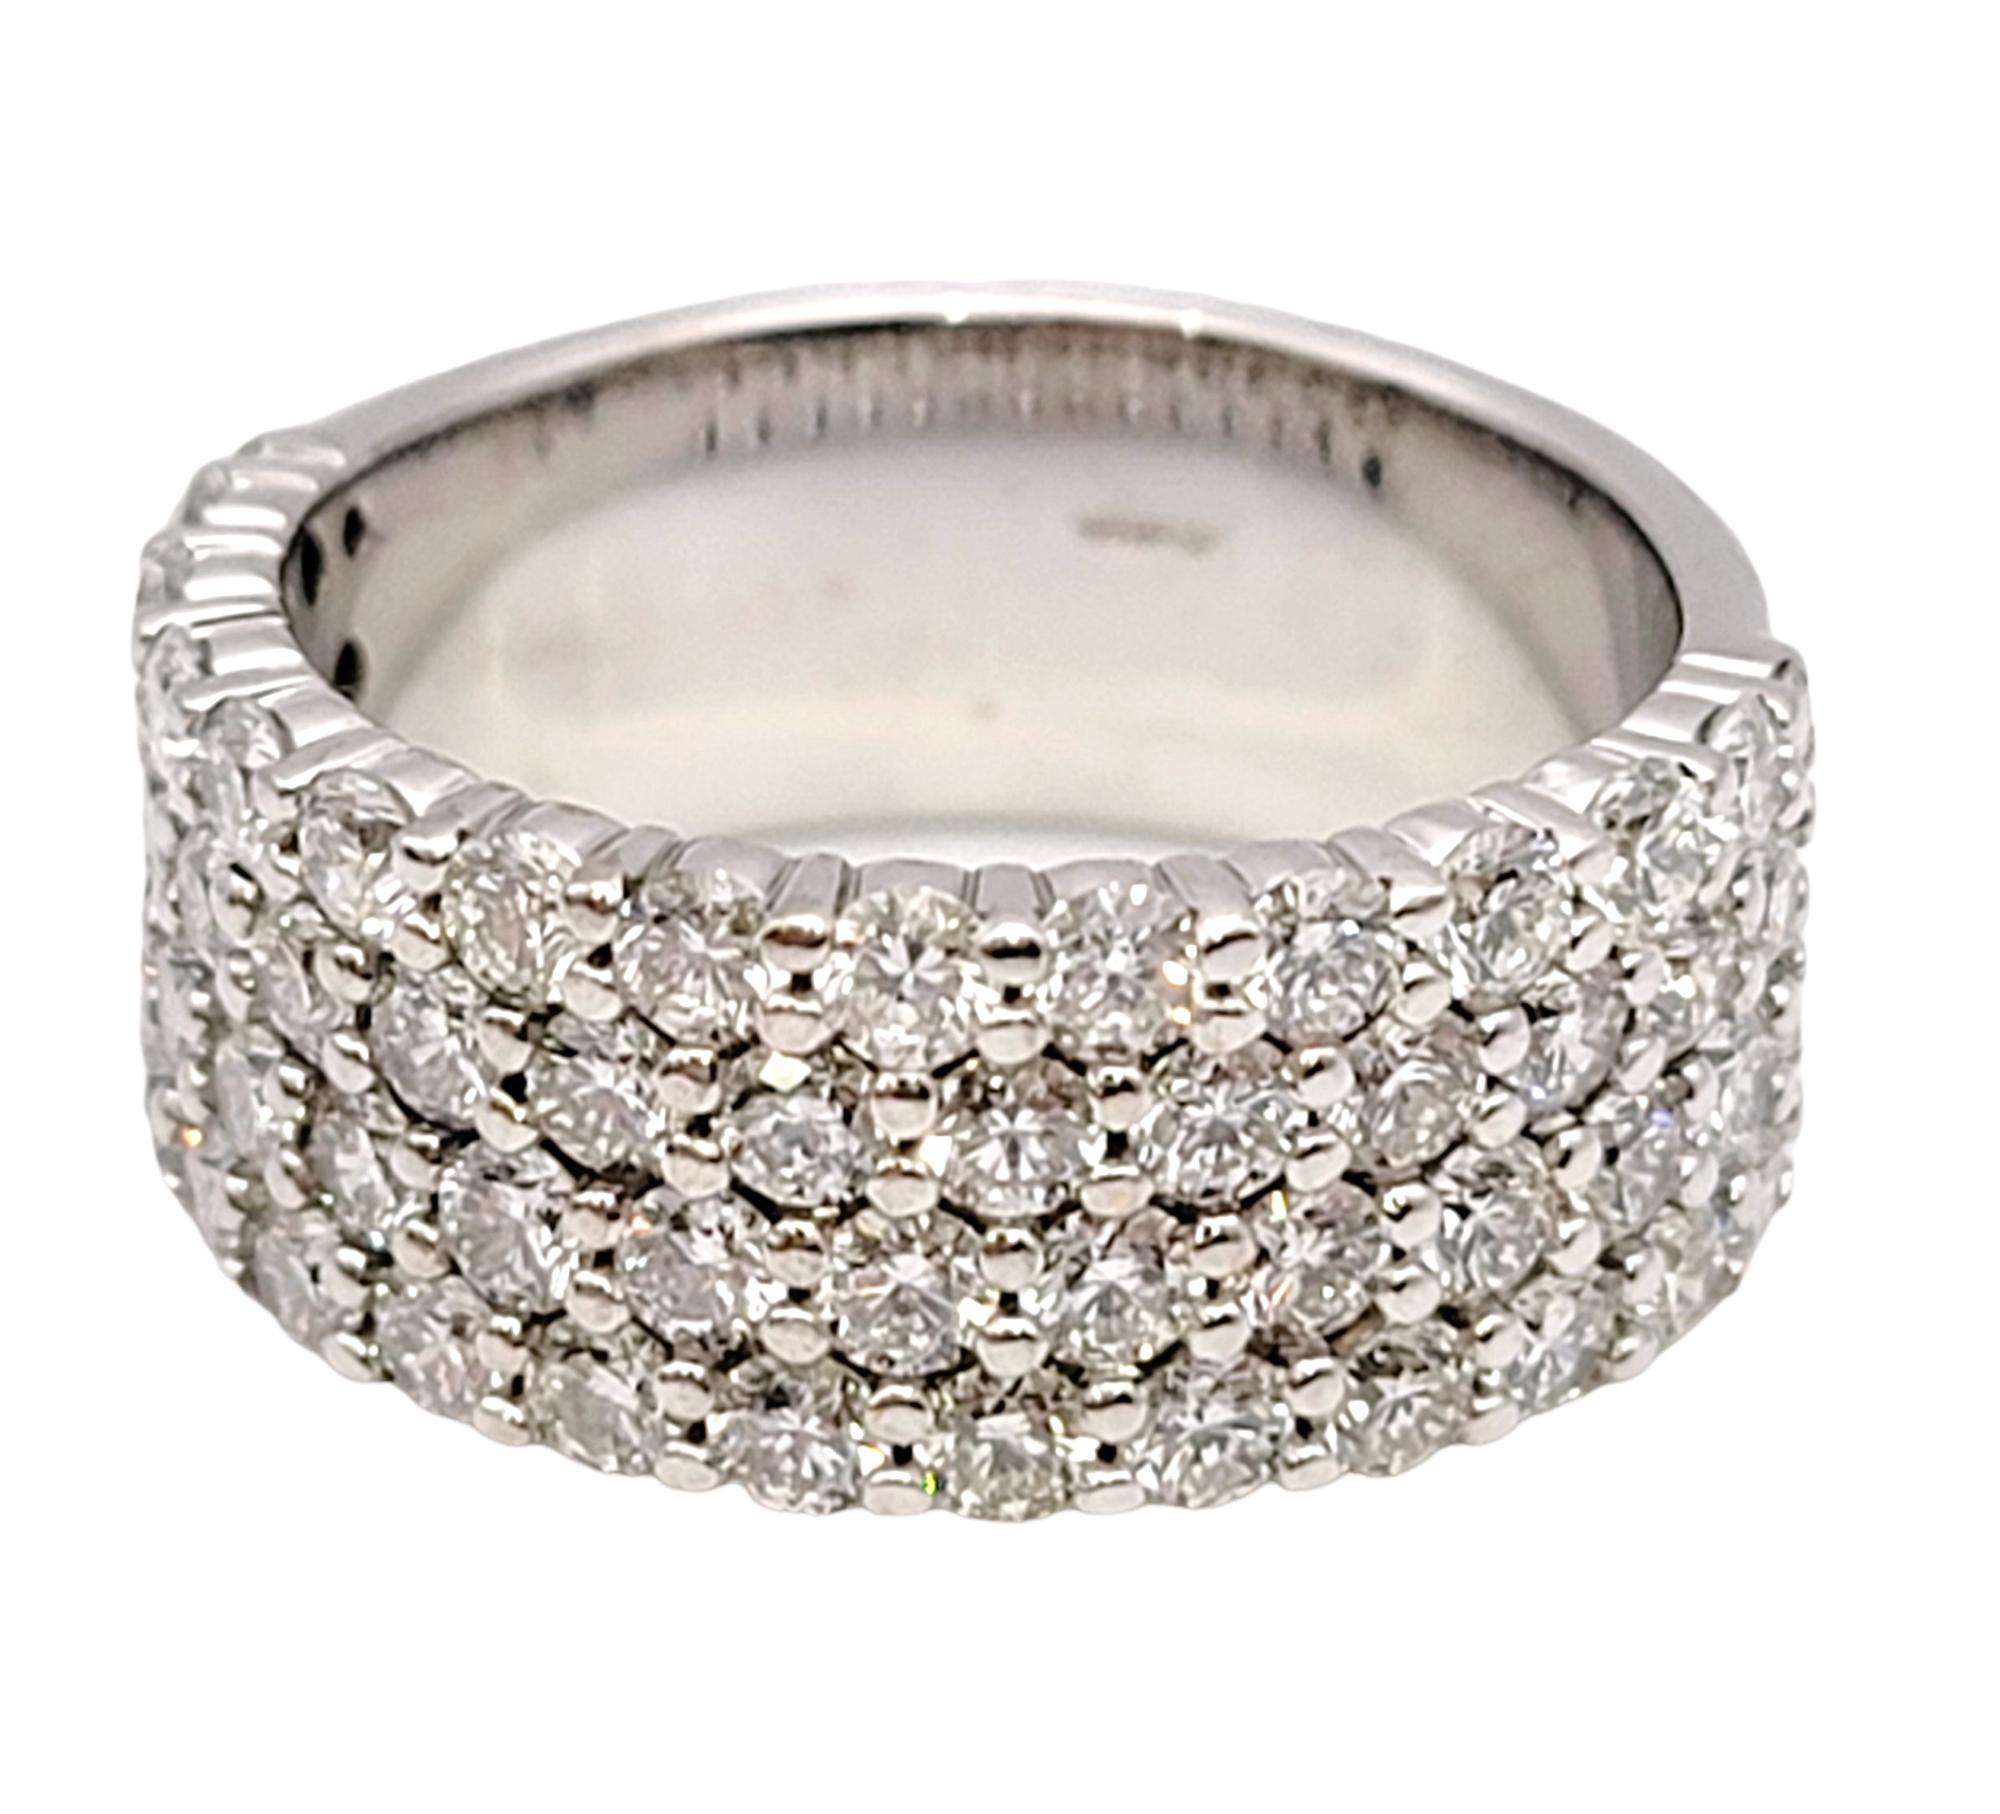 1.95 Carat Total Four-Row Pave Diamond Semi-Eternity Band Ring in White Gold In Good Condition For Sale In Scottsdale, AZ